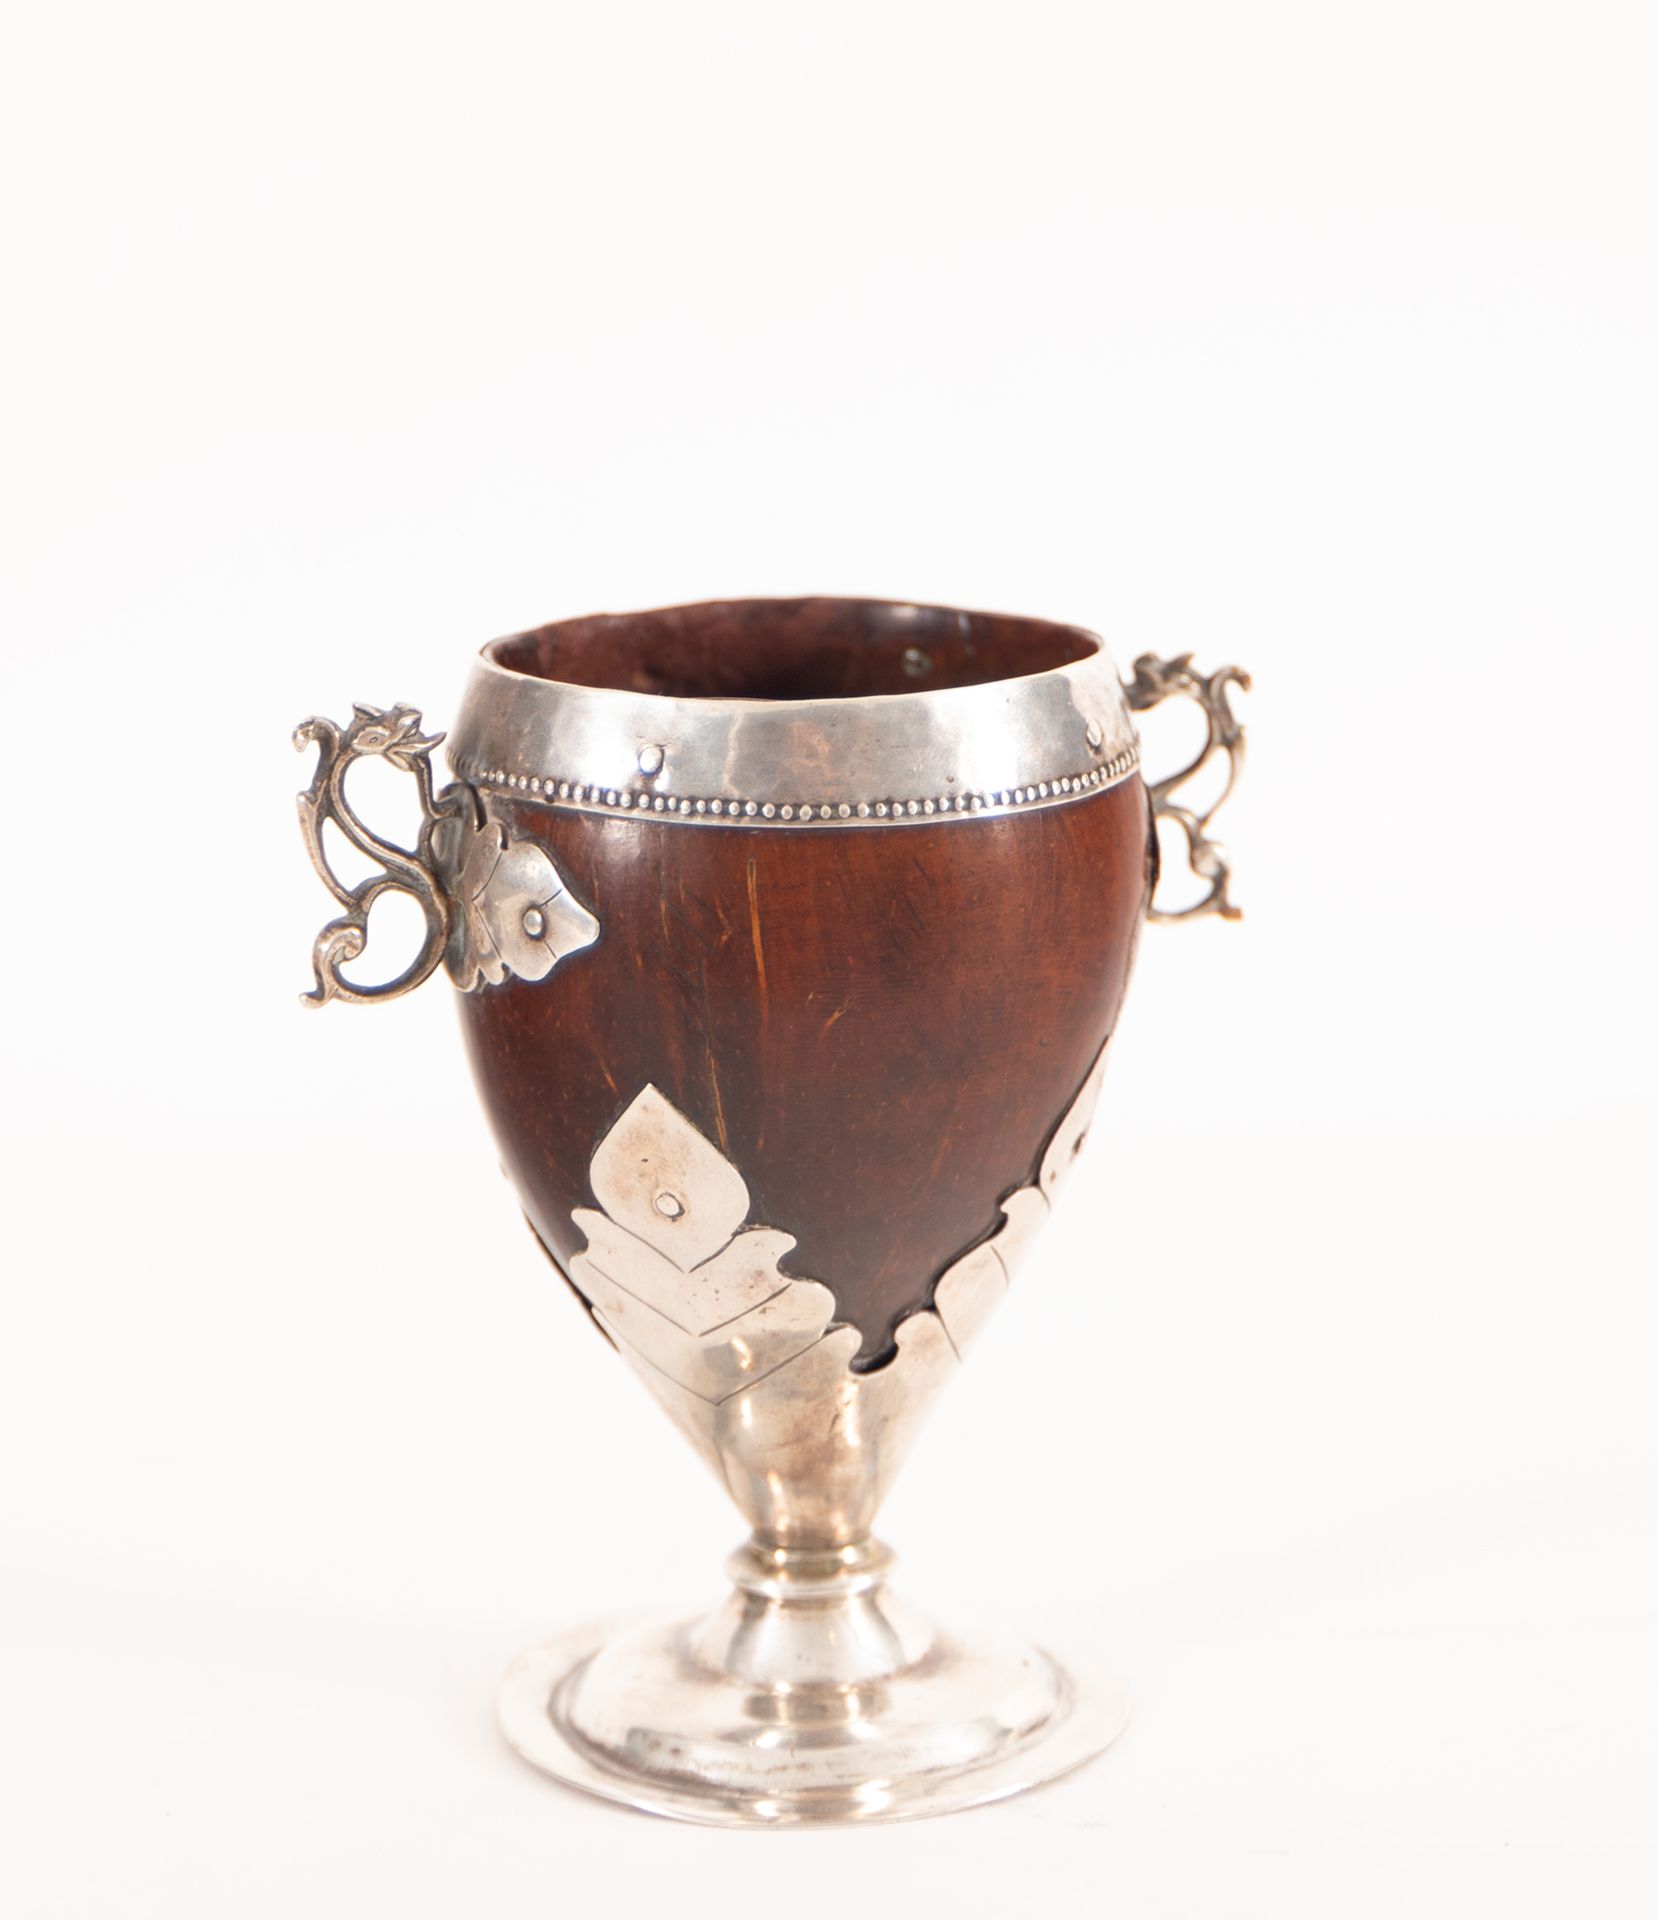 Rare Silver Mounted Chocolate Cup, Colonial School, Viceroyalty of New Granada, 18th Century - Image 2 of 5